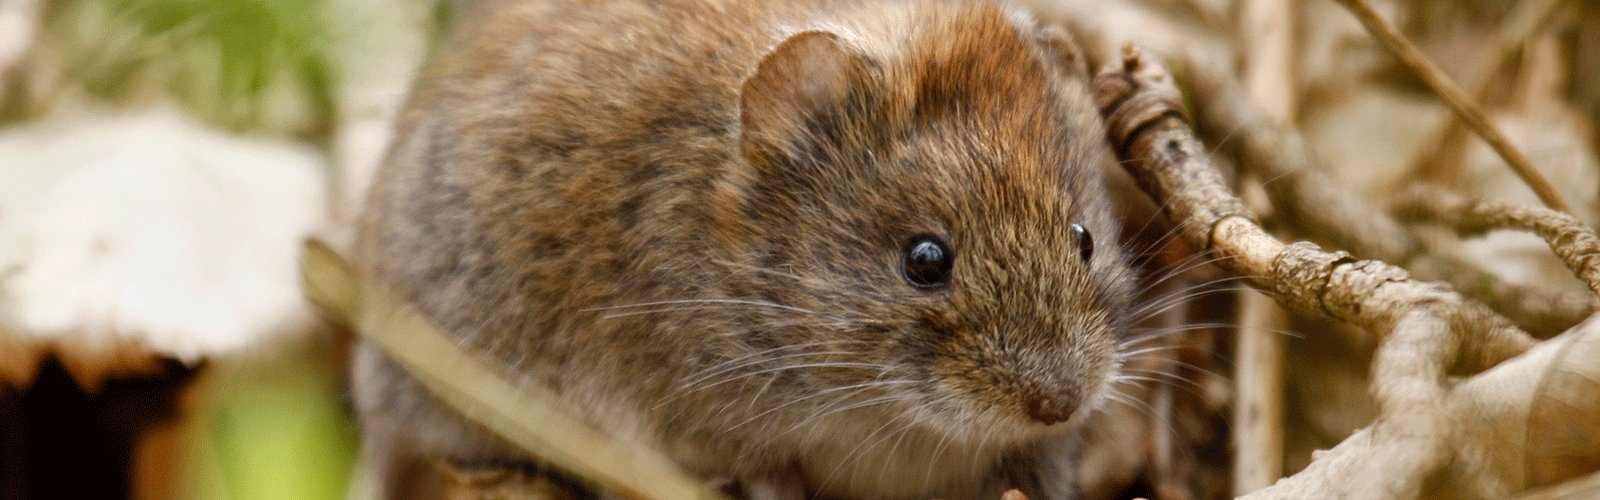 garden cleanup: targeting mice and voles - A Way To Garden